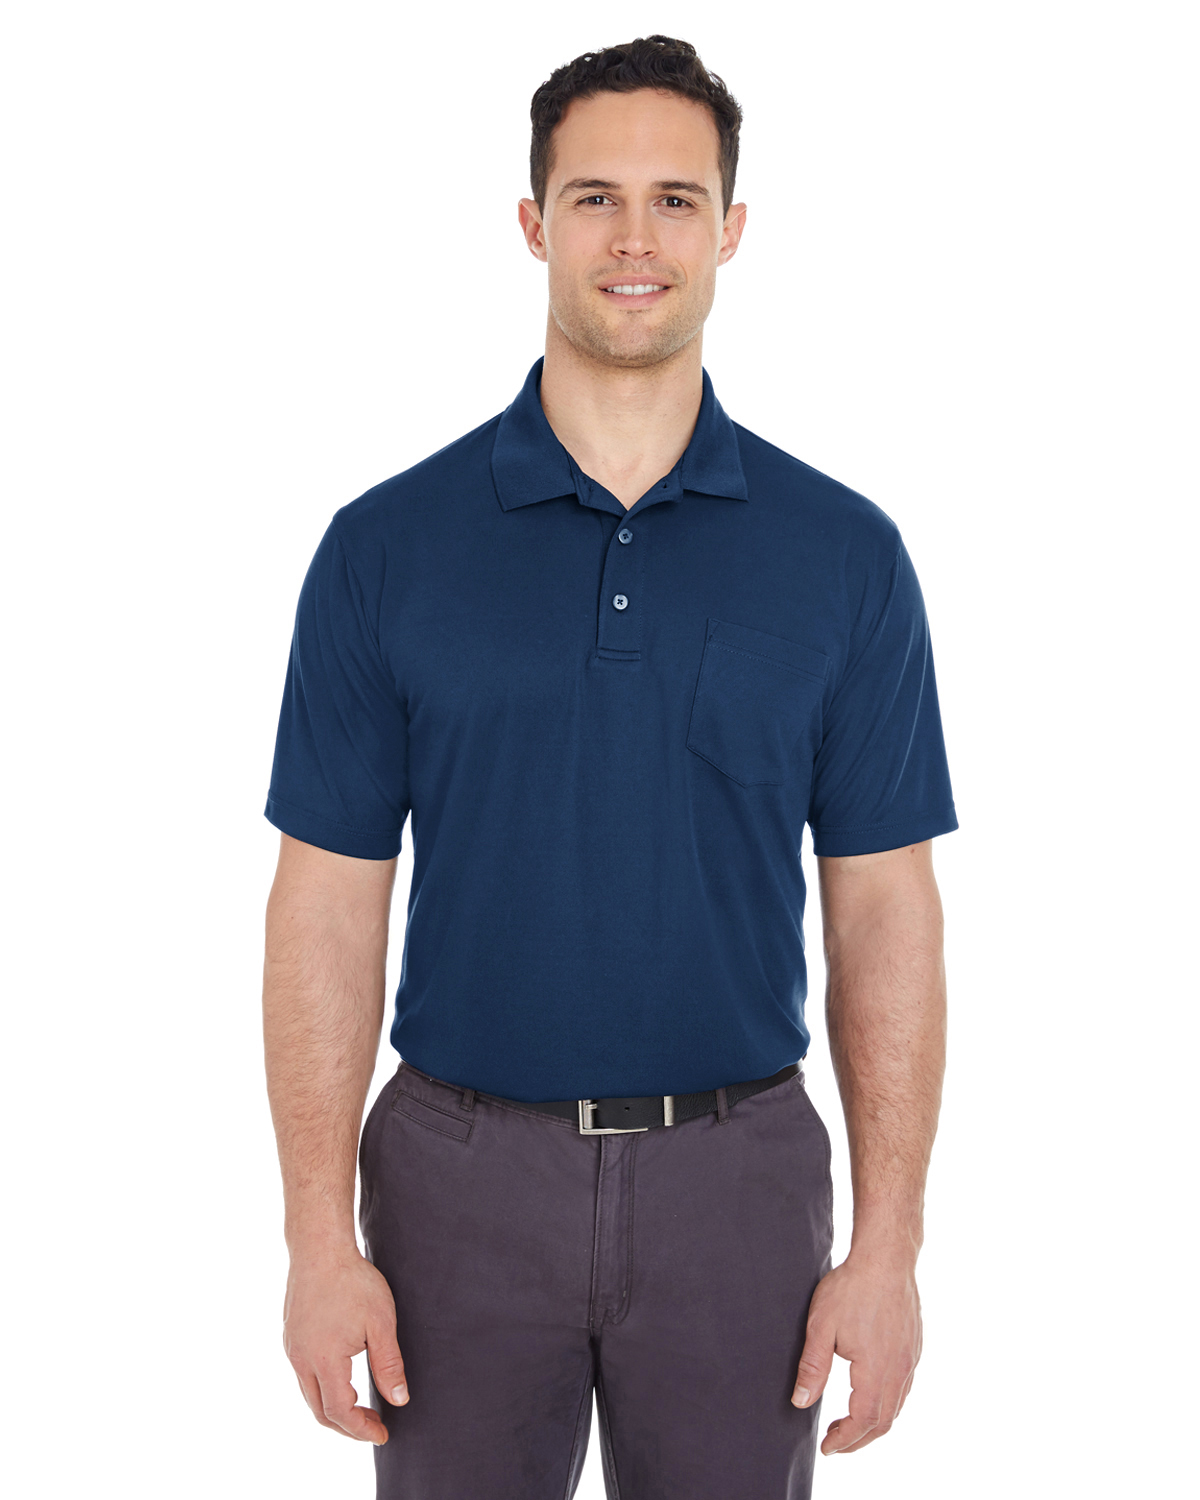 Ultra Club 8210P - Adult Cool & Dry Mesh Pique Polo with Pocket $12.68 ...